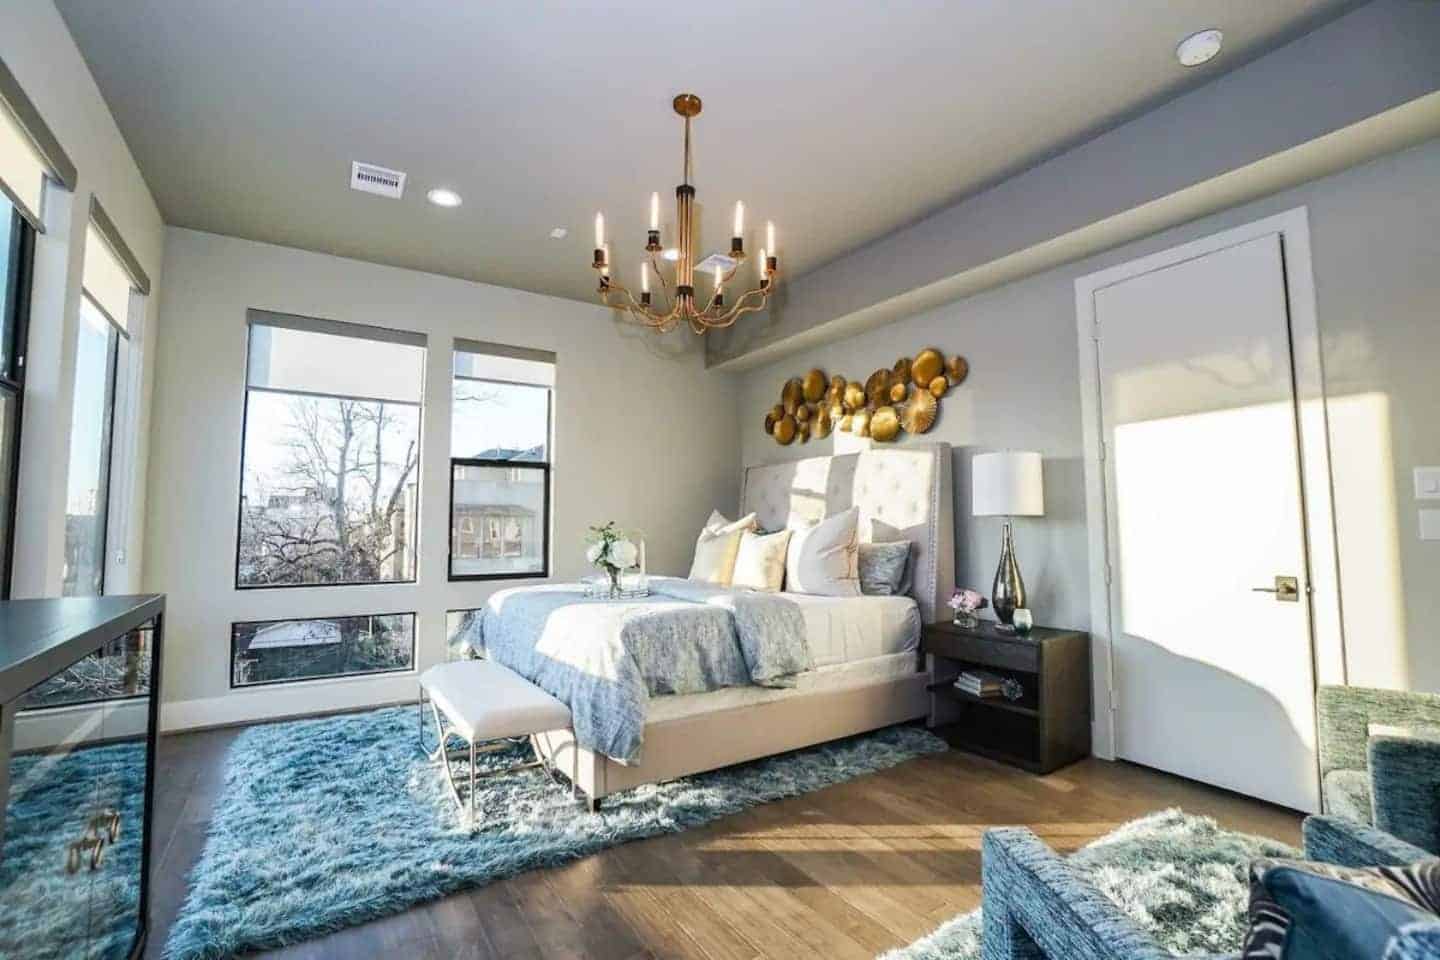 Image of Airbnb rental in Houston, Texas